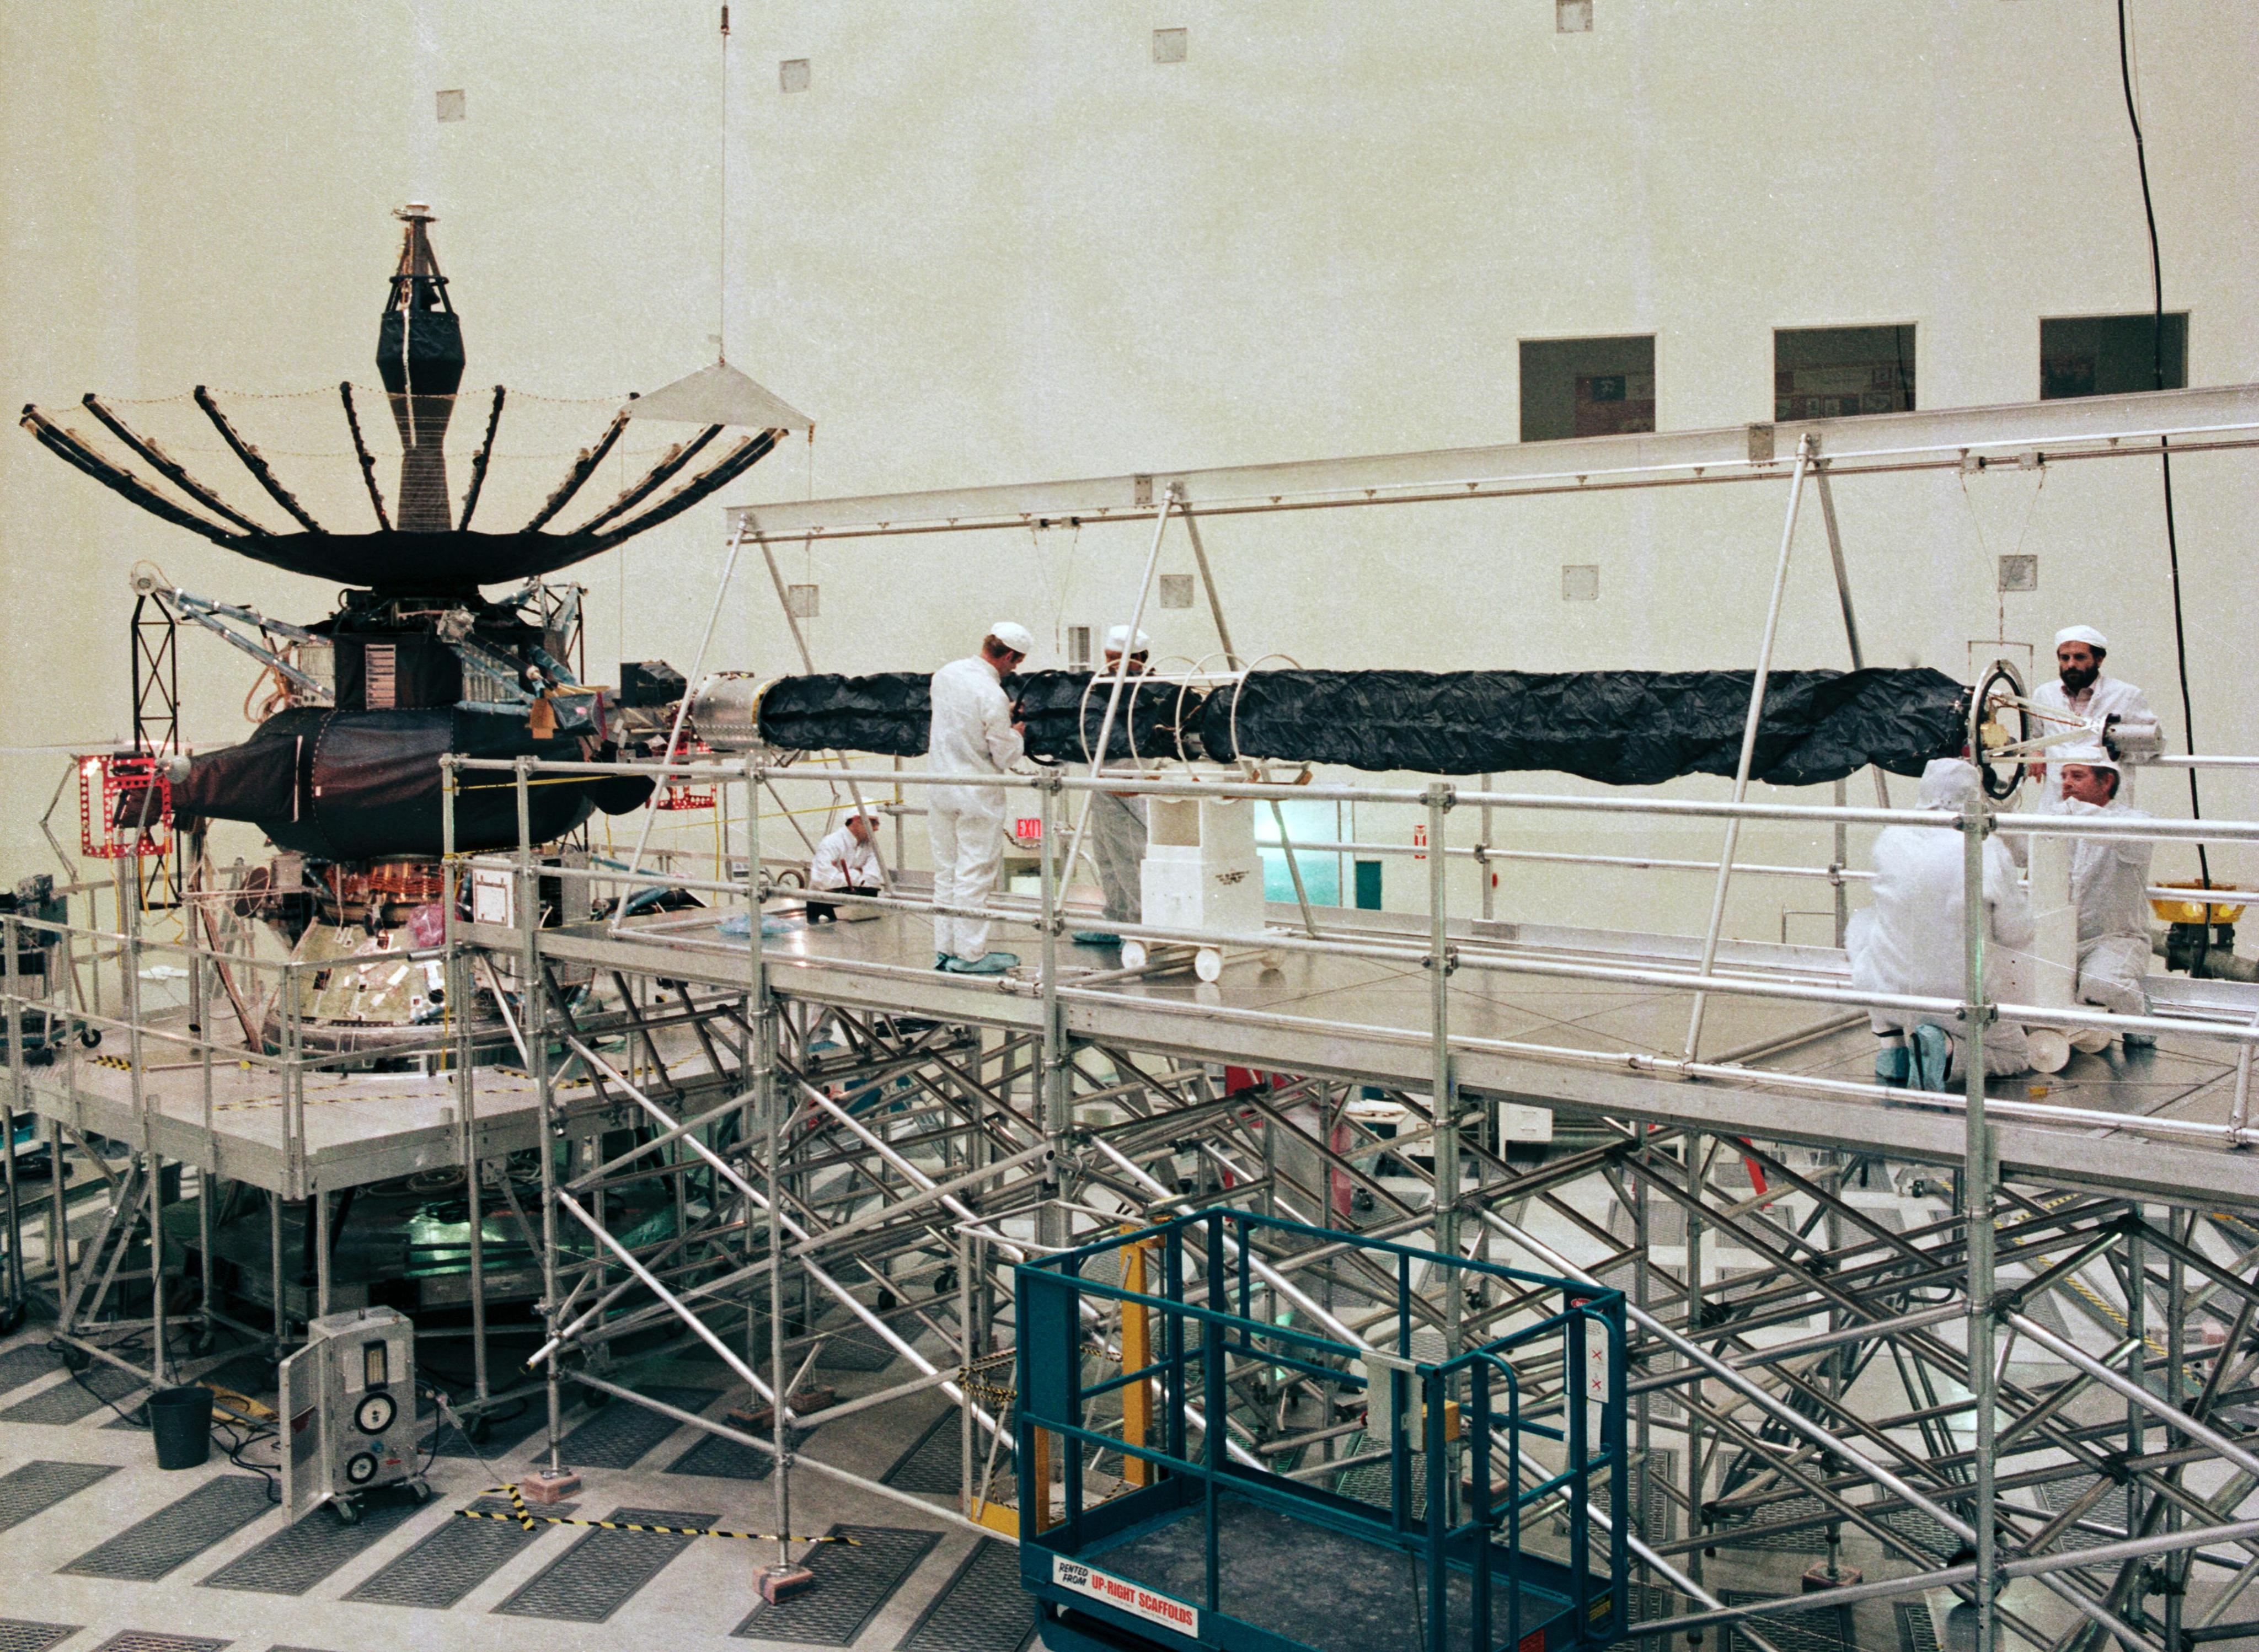 Engineers in white cleanroom suits stand on scaffolding to work on the fully-assembled Galileo orbiter.